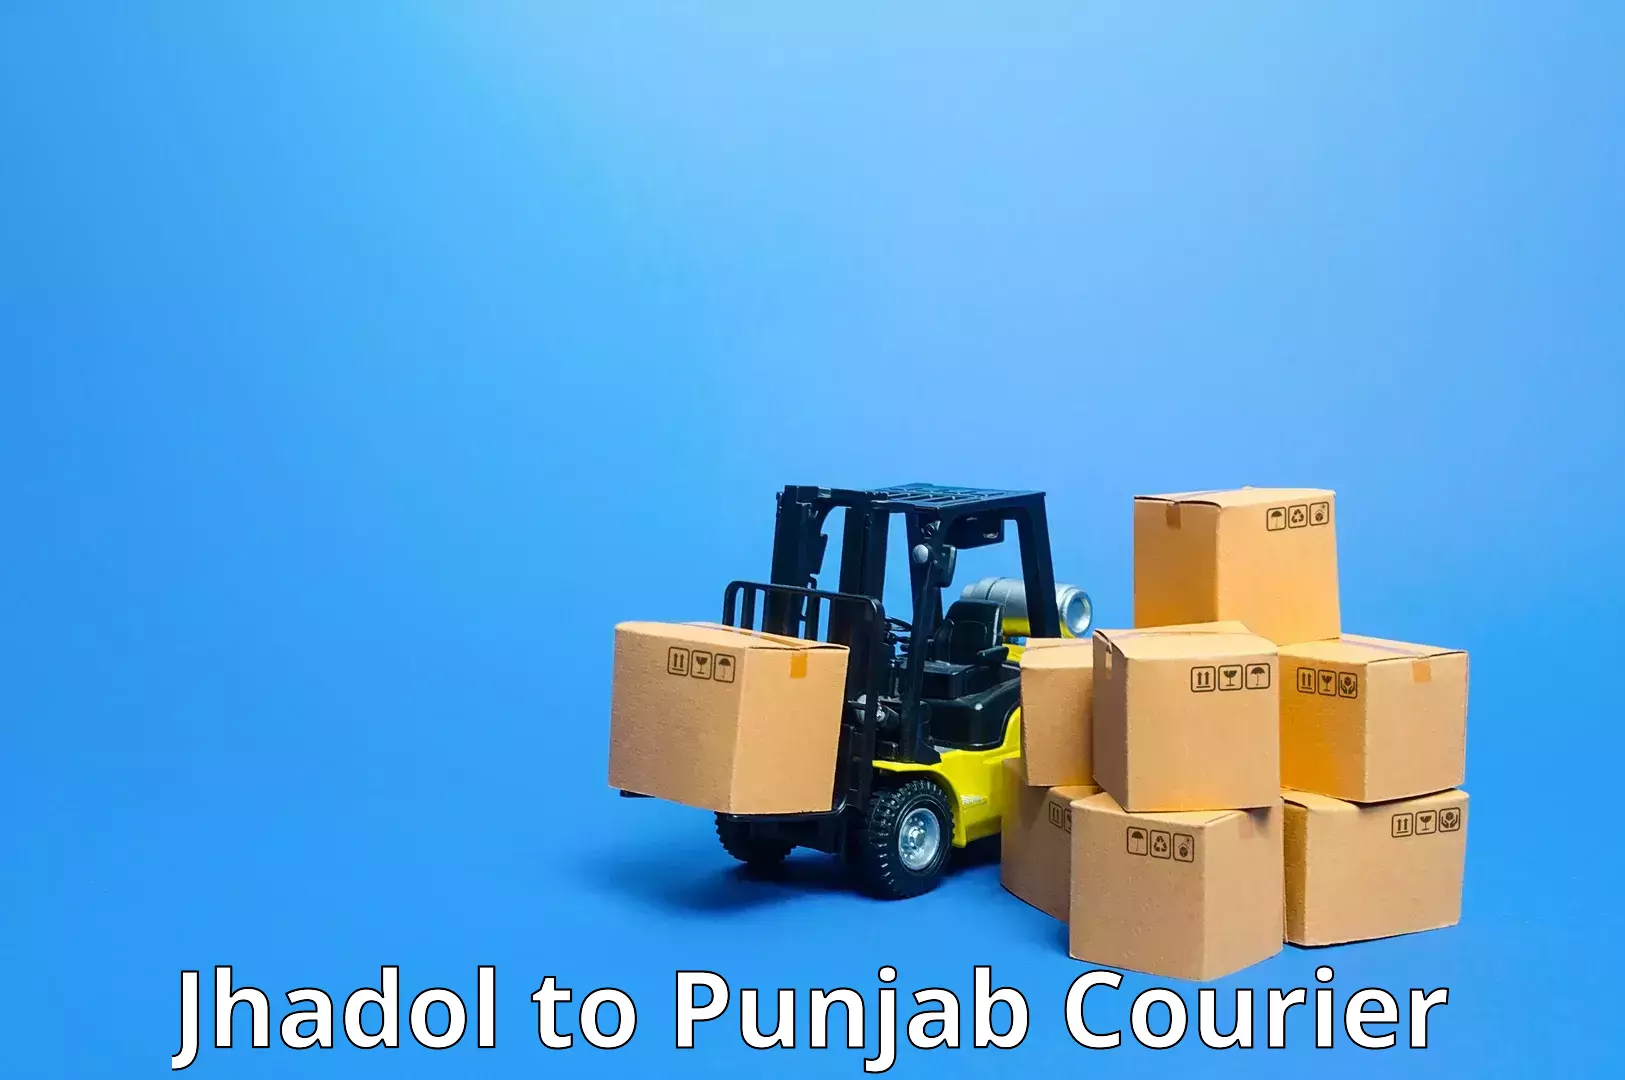 Flexible delivery schedules Jhadol to Faridkot